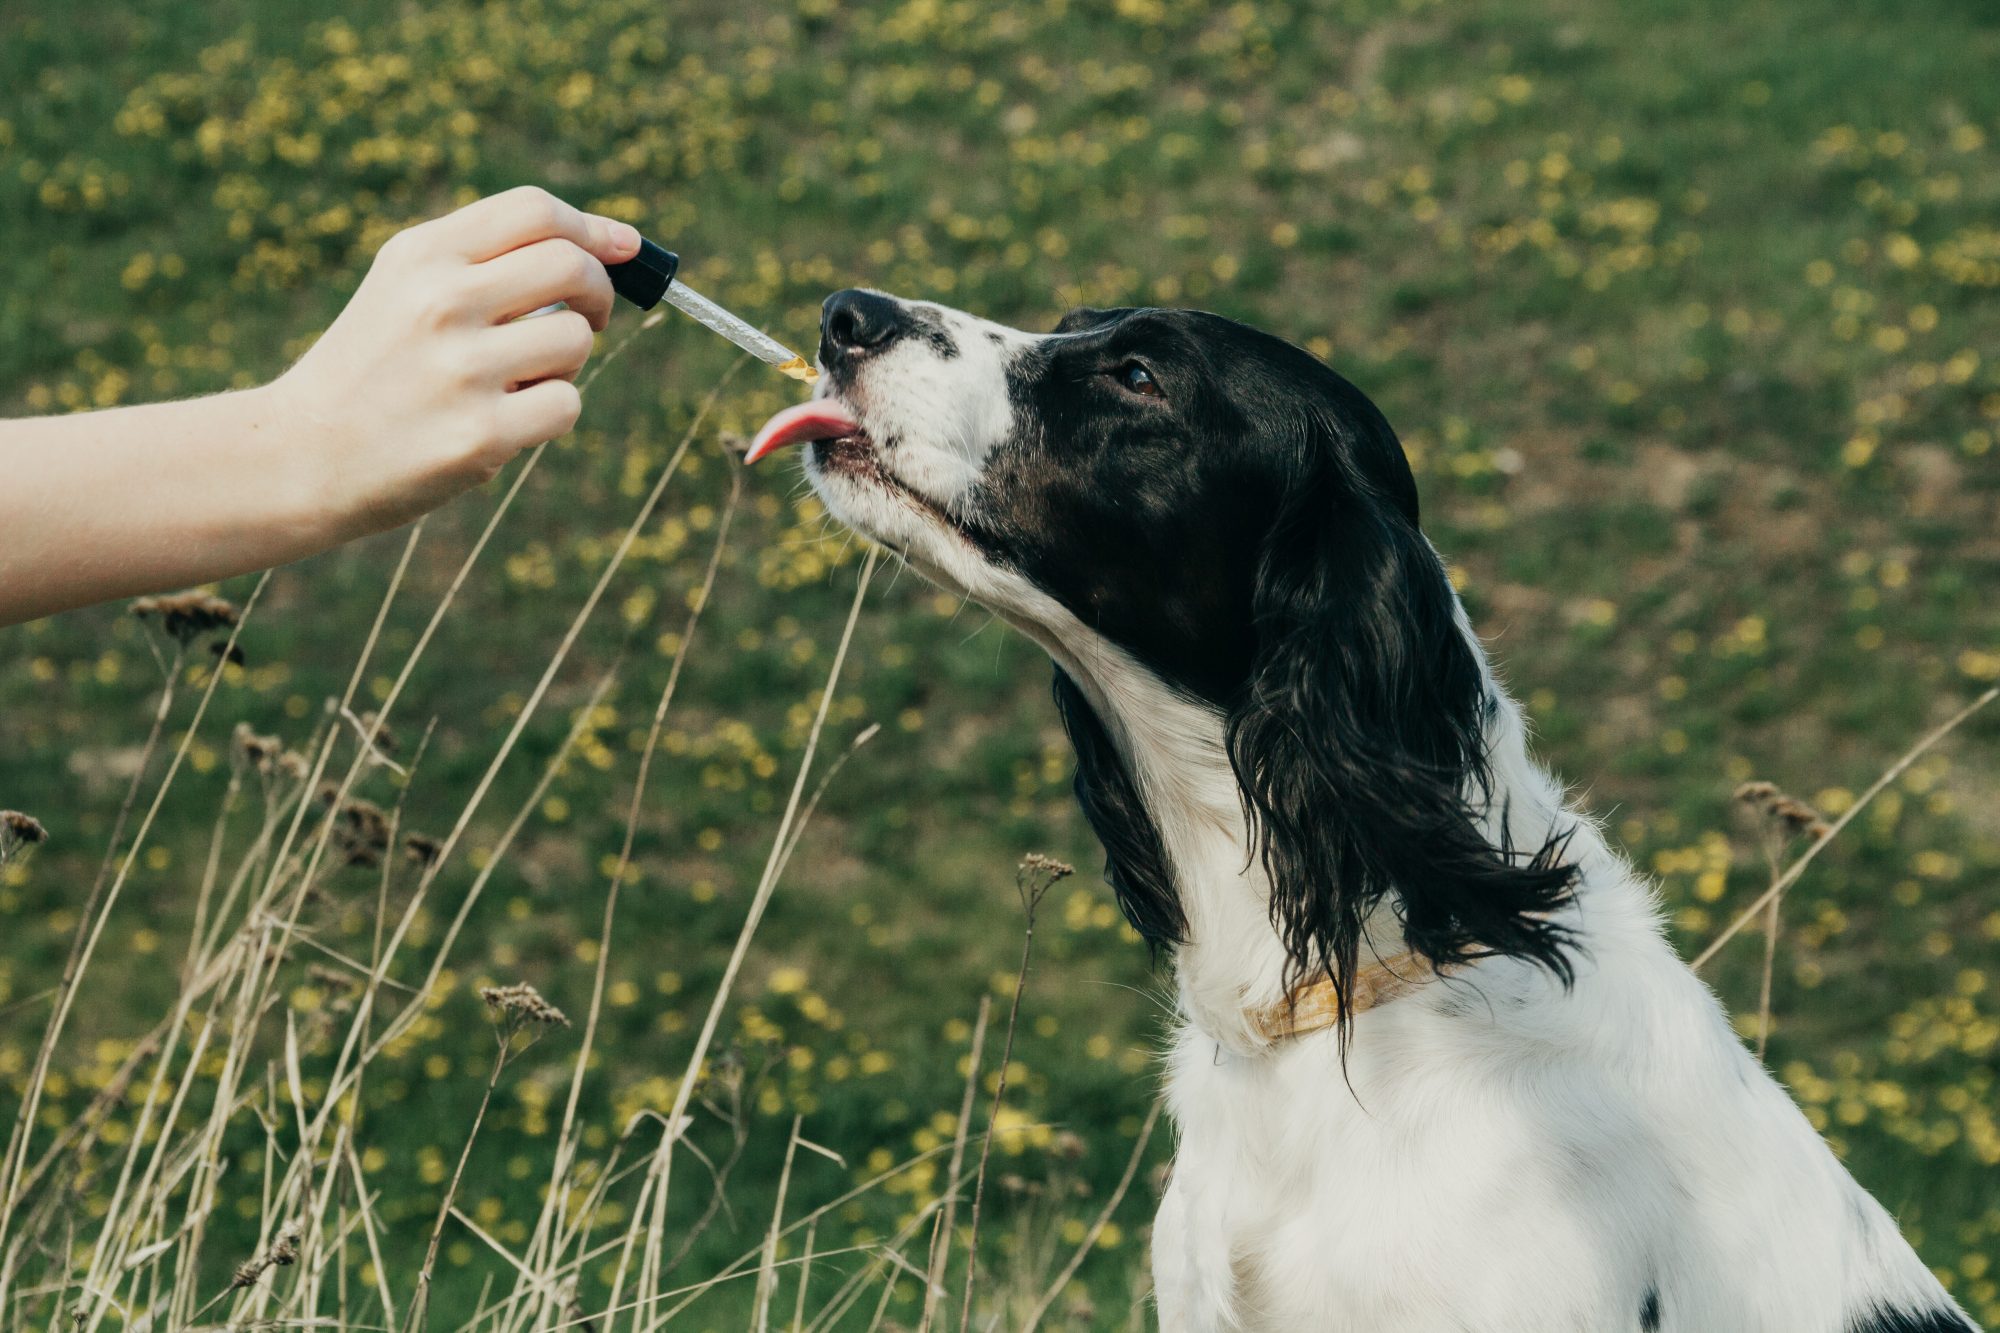 CBD Dog Treats: A Great Way to Help Your Dog’s Overall Health